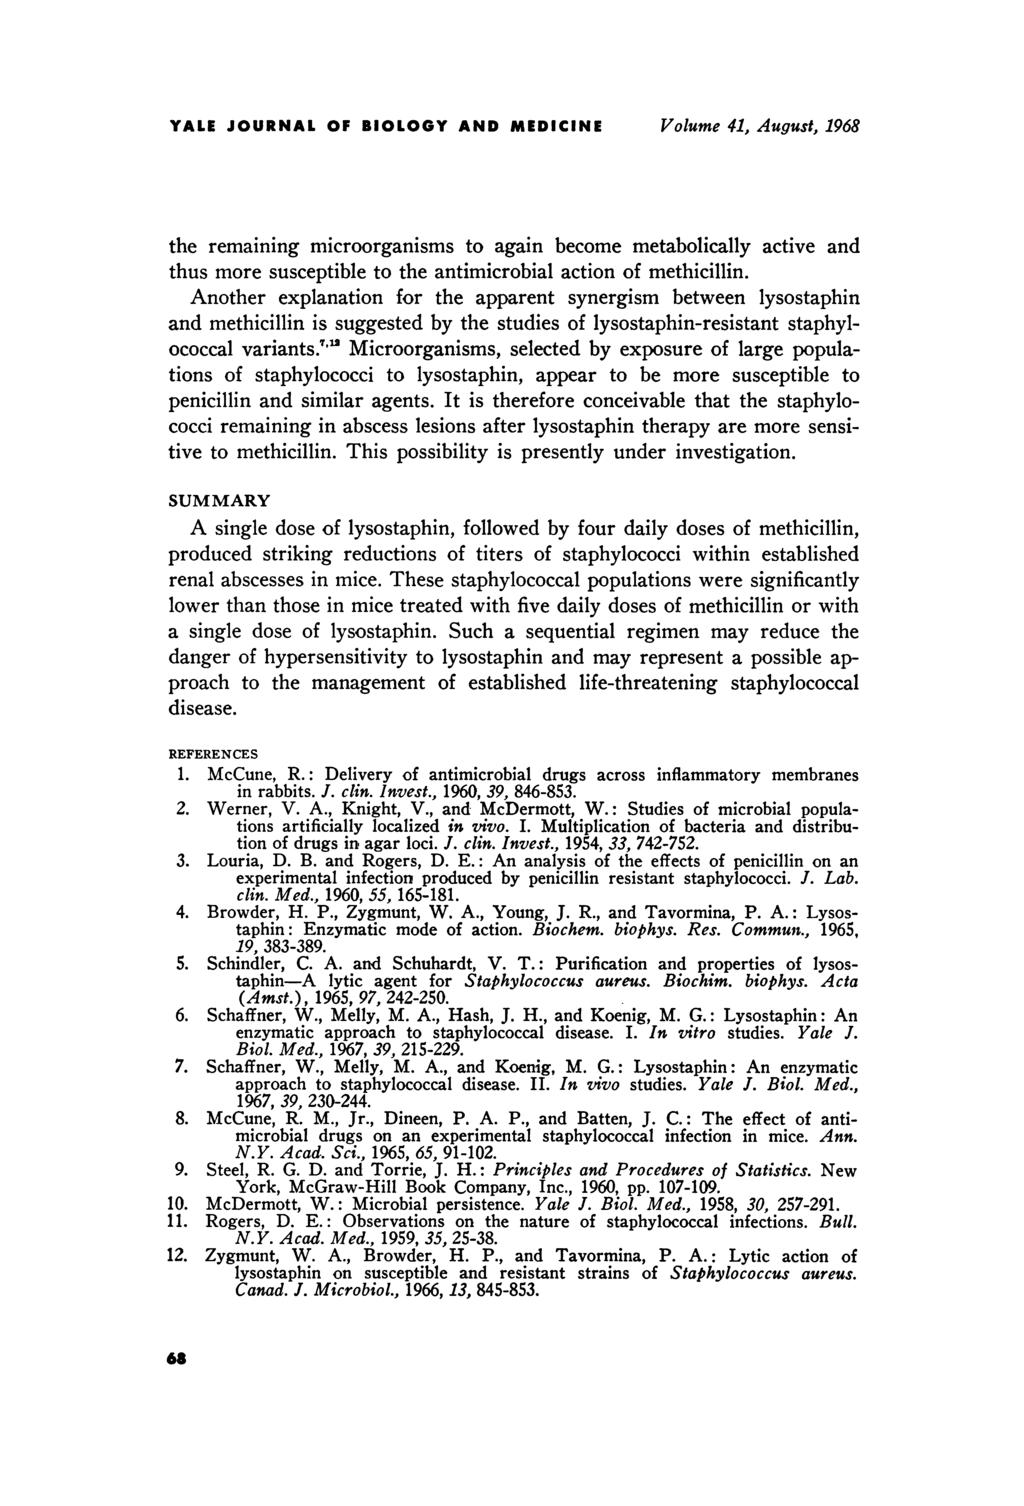 YALE JOURNAL OF BIOLOGY AND MEDICINE Volume 41, August, 1968 the remaining microorganisms to again become metabolically active and thus more susceptible to the antimicrobial action of methicillin.